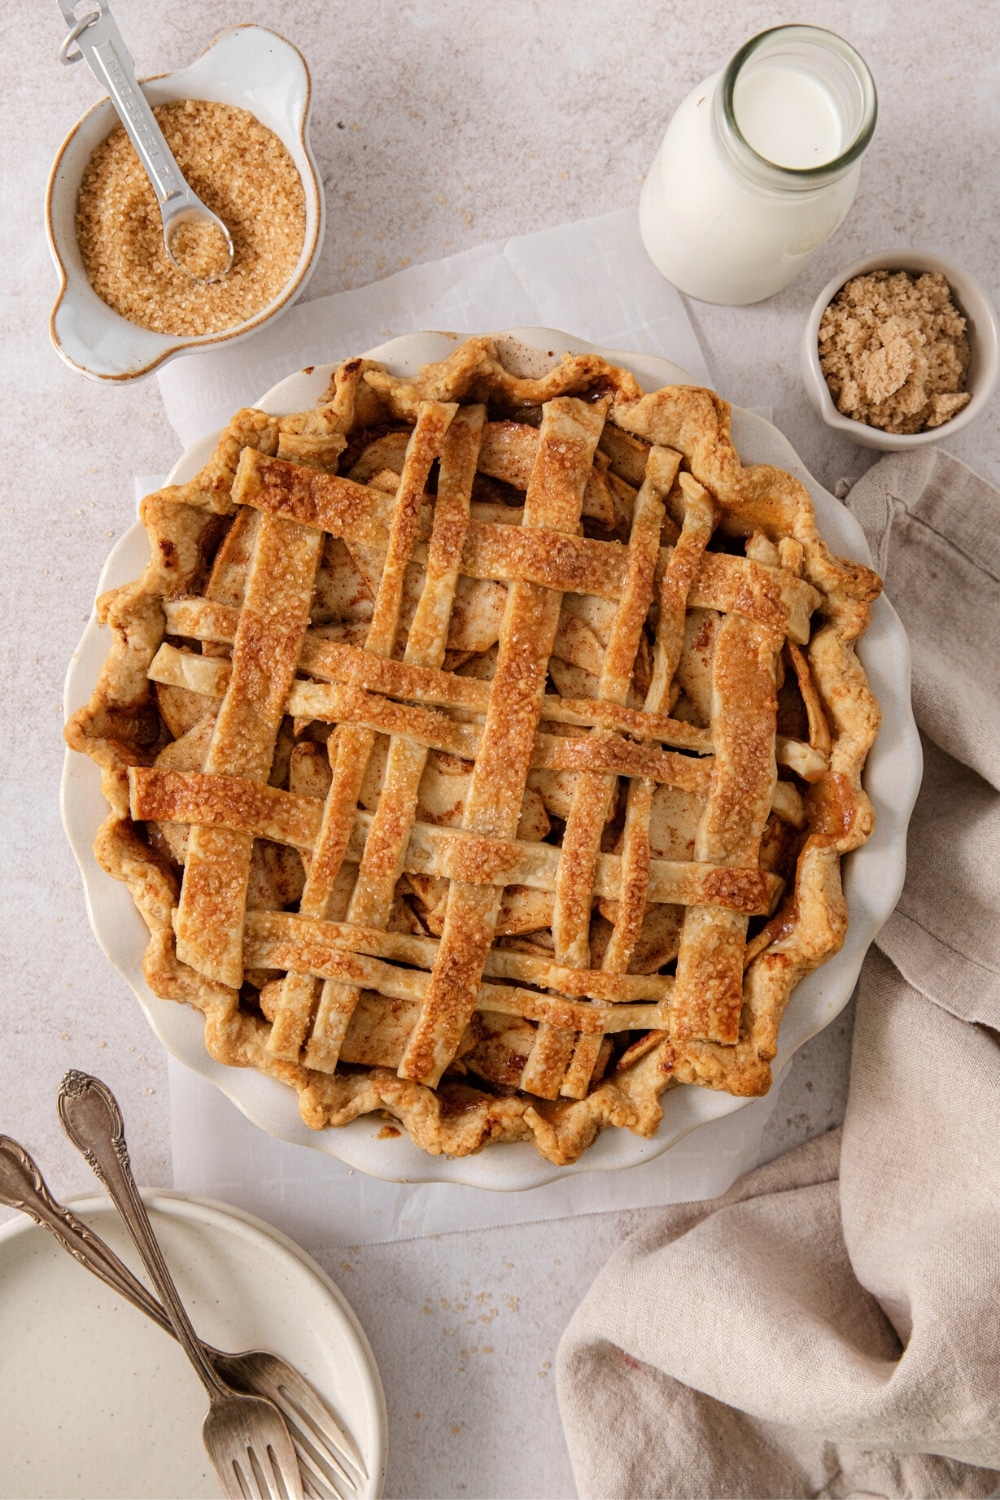 Celebrate apple-picking season with these handy pie-making tools